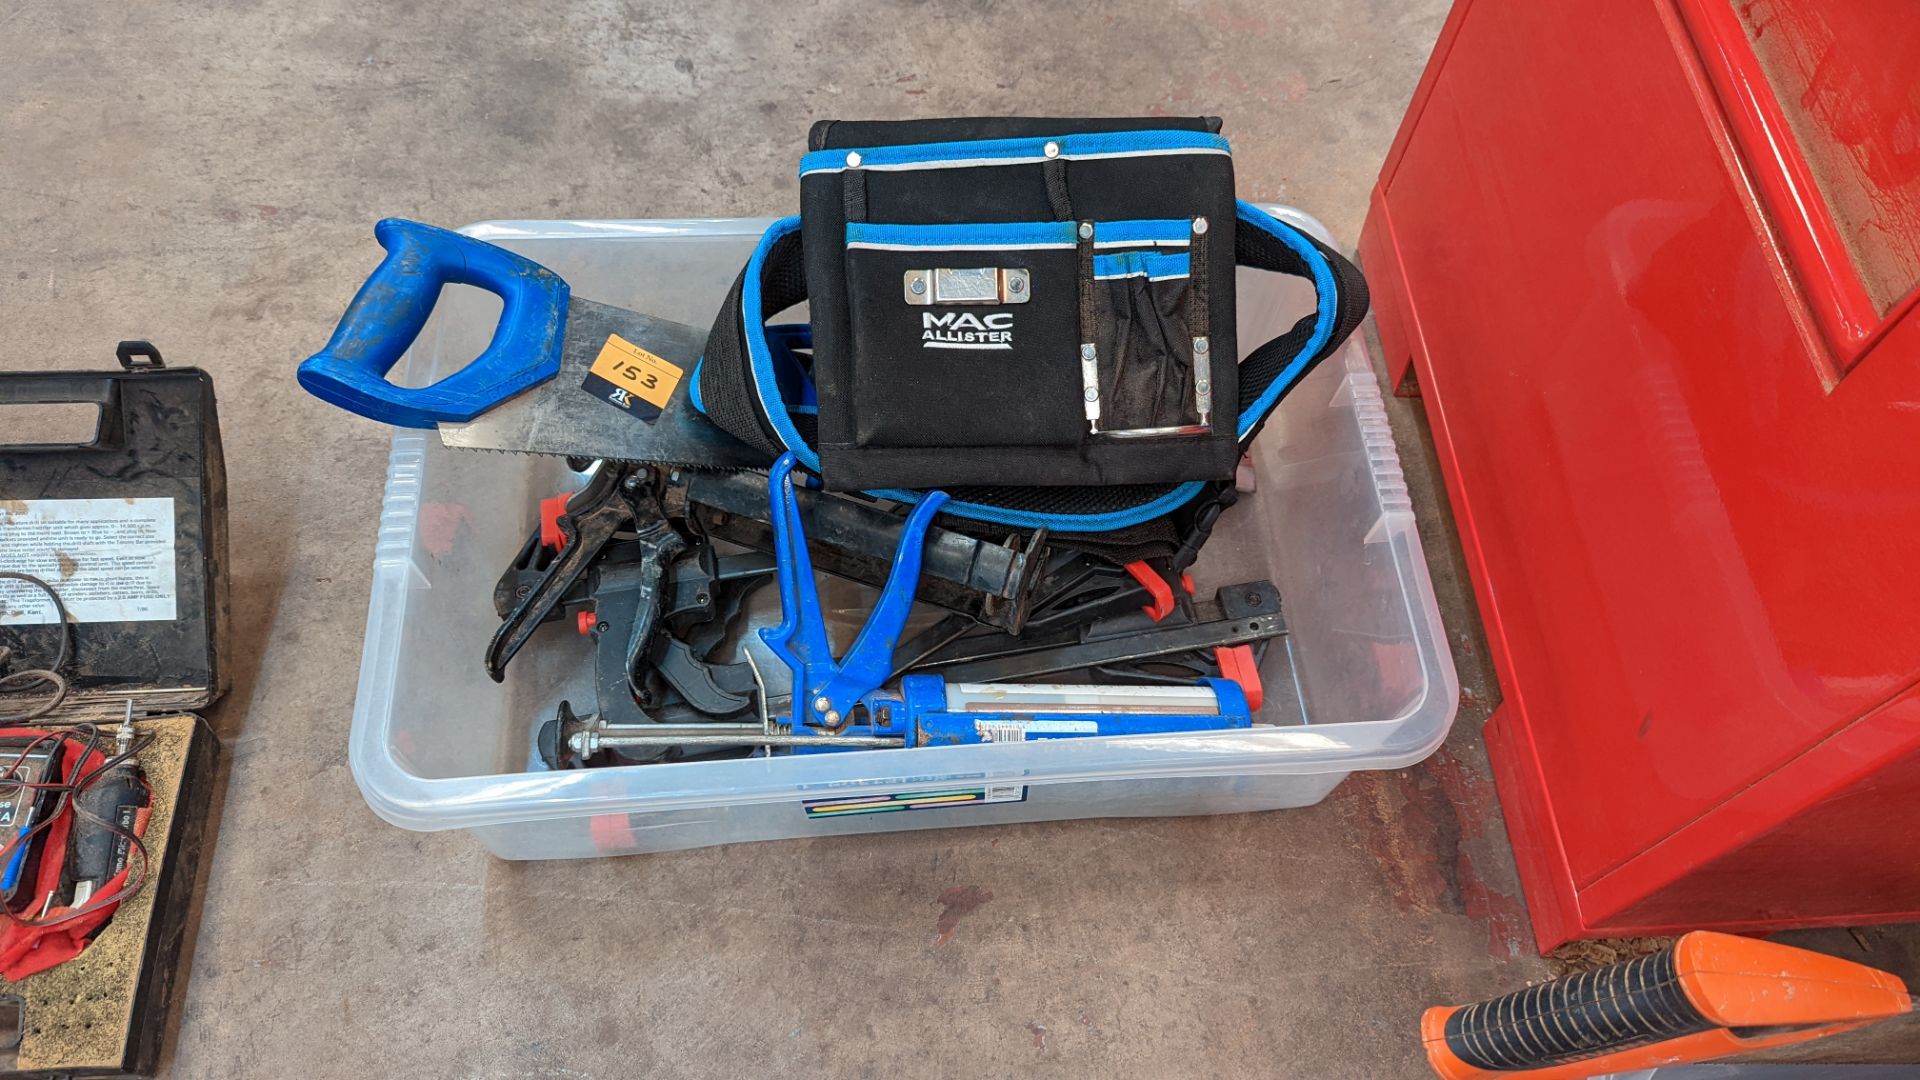 Contents of a crate of clamps & other similar tooling - crate excluded